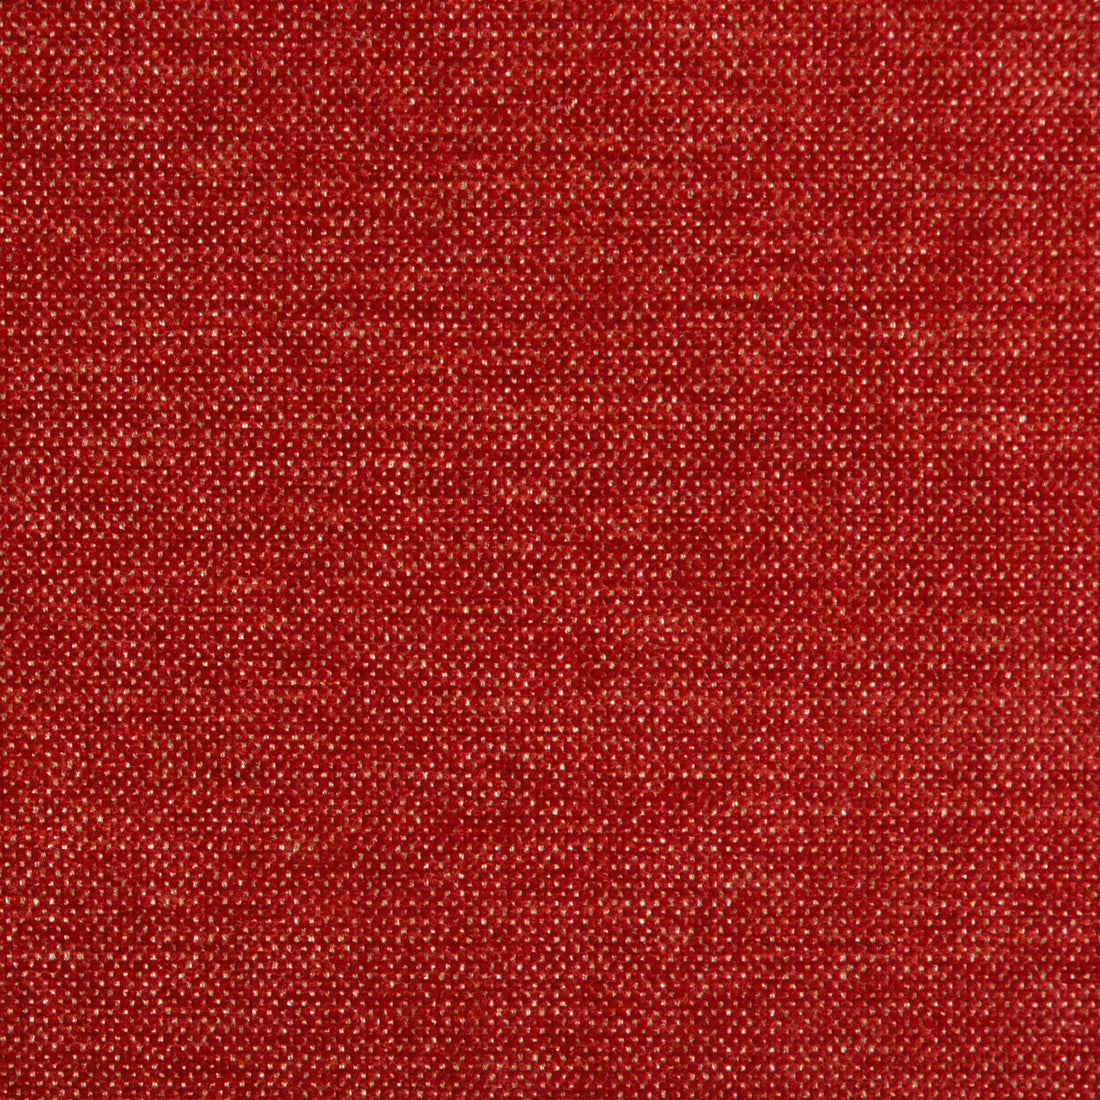 Kravet Smart fabric in 35393-19 color - pattern 35393.19.0 - by Kravet Smart in the Performance Crypton Home collection